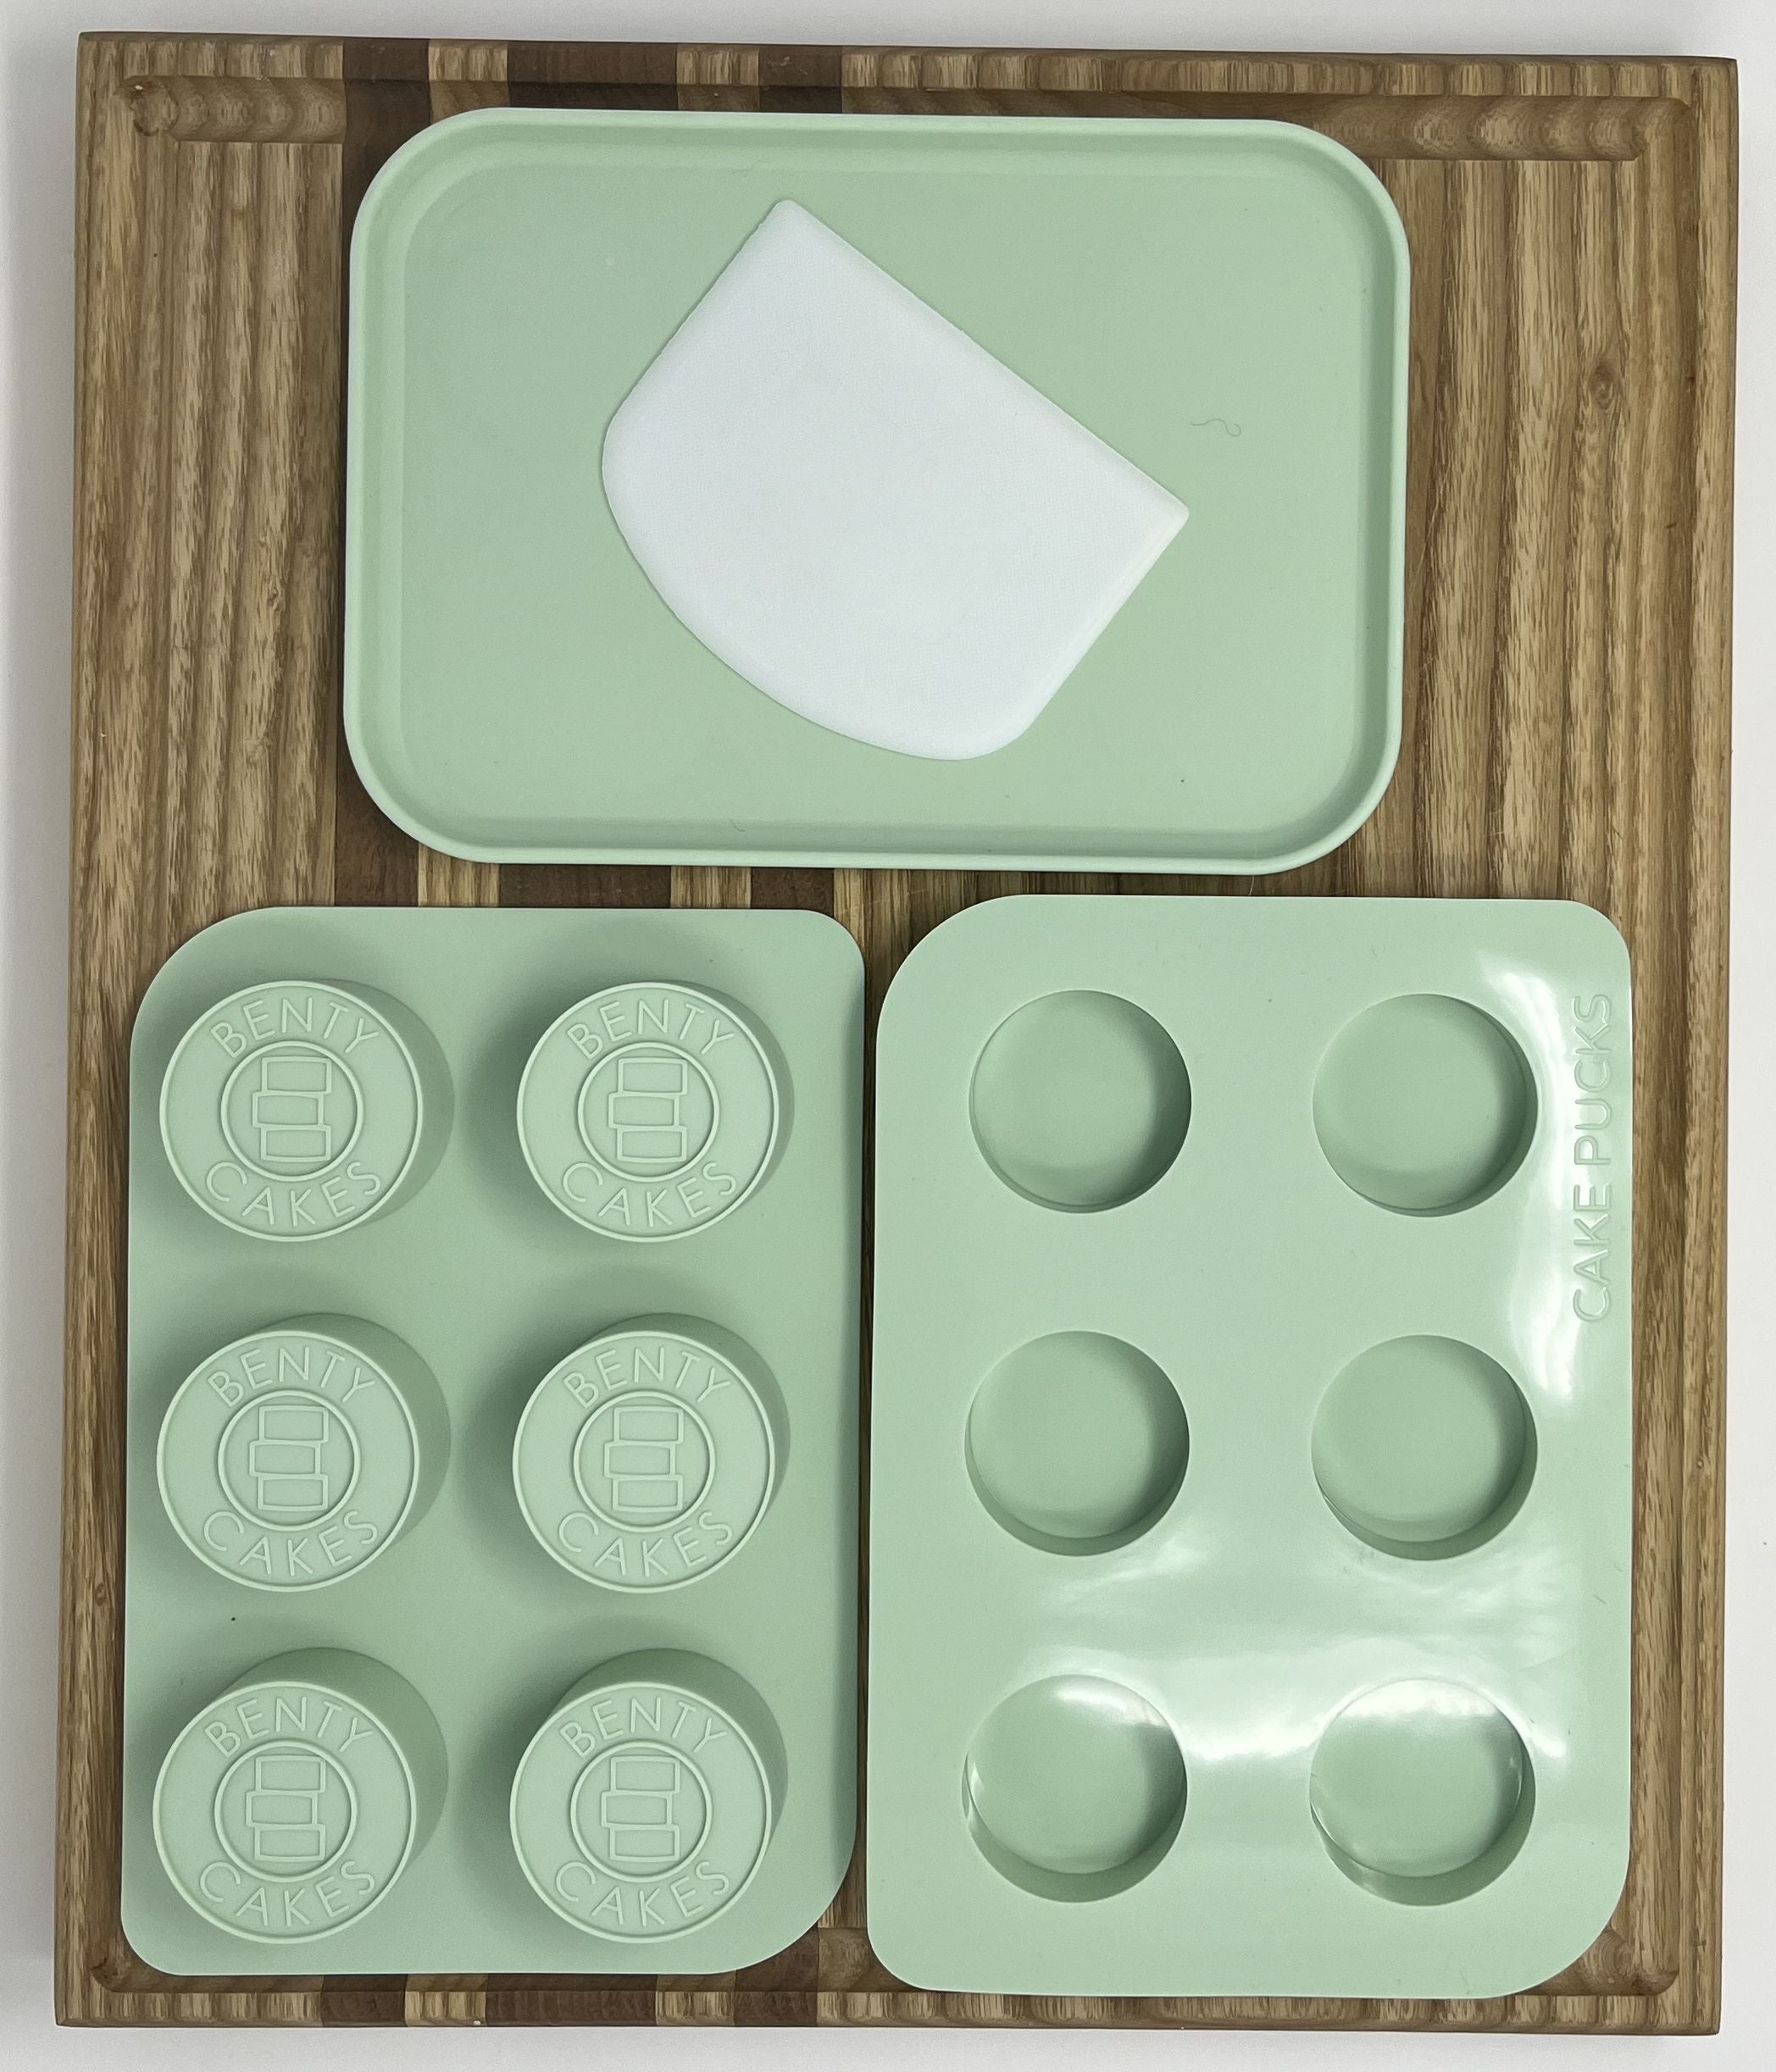 Benty Cakes The Original Cake Puck Mold Set – It's Not A Pop, It's A Puck! The Easier Way to Make Chocolate Covered Desserts – BPA Free